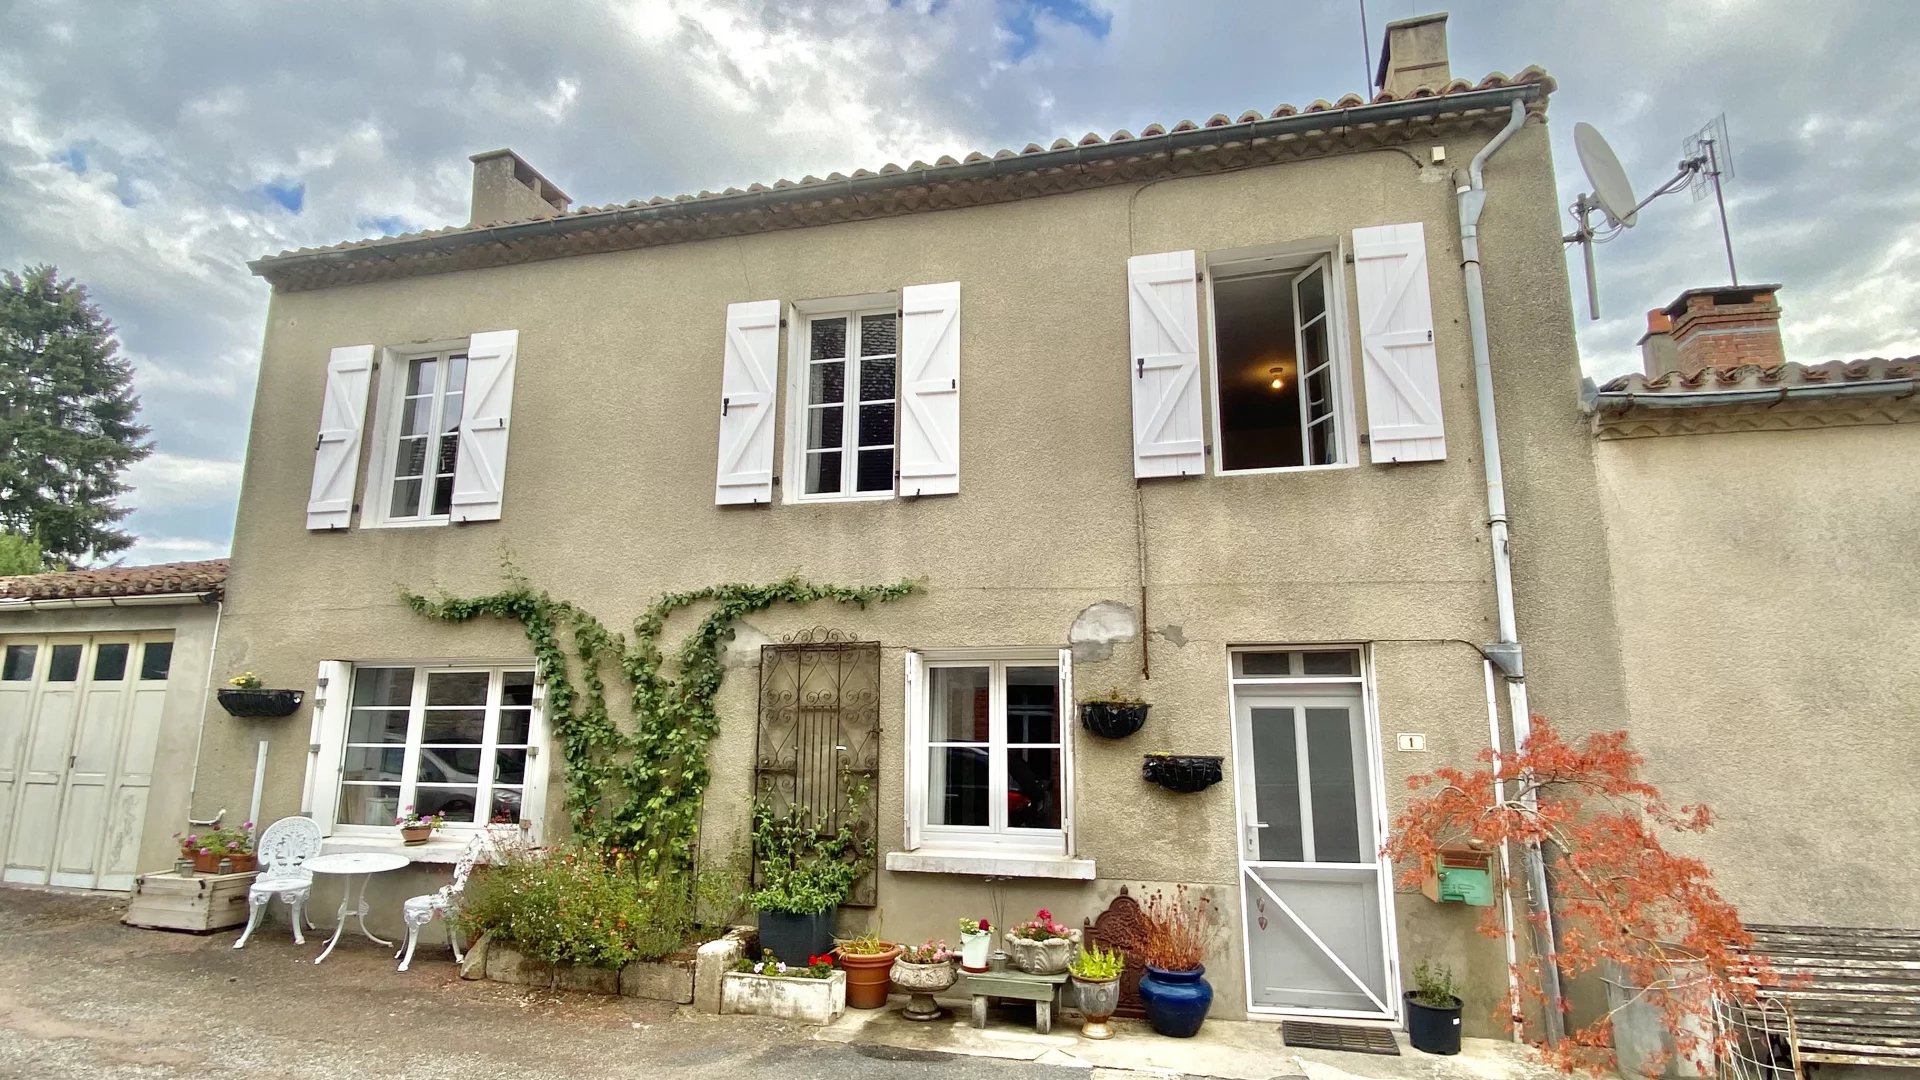 Renovated property in a French village